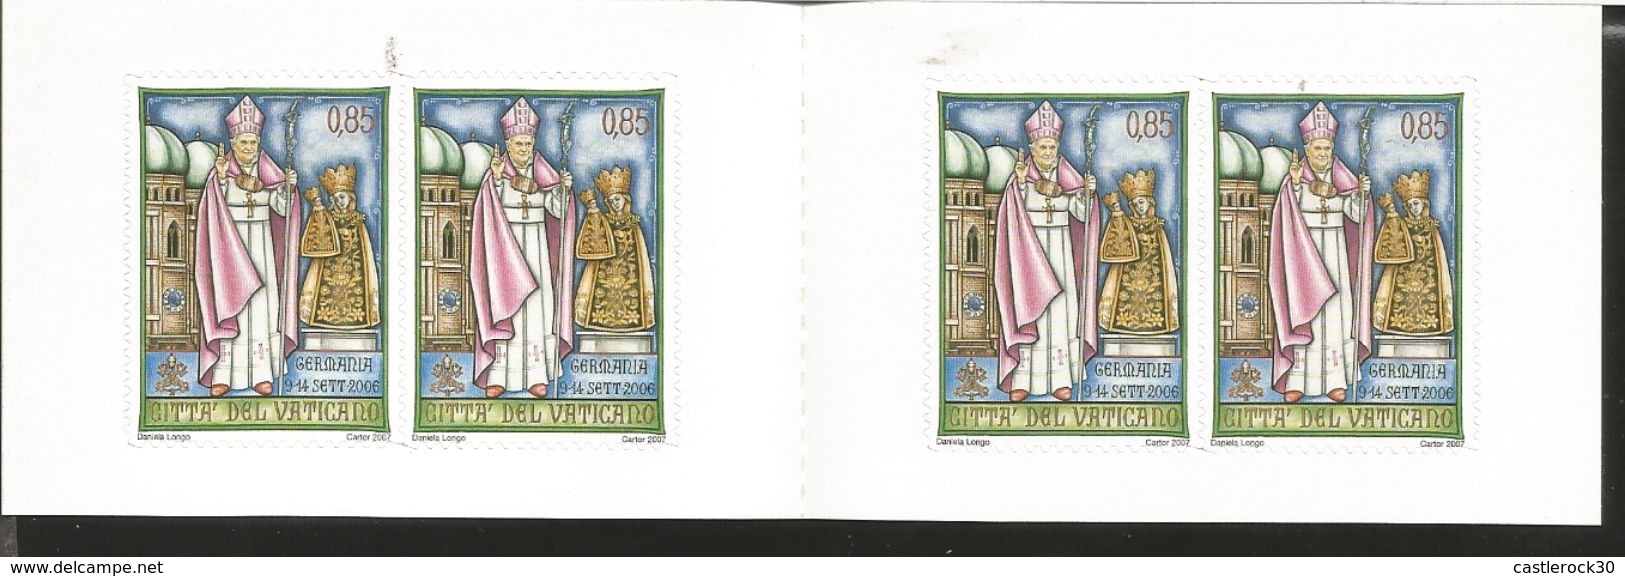 J) 2007 VATICAN CITY, BOOKLET, THE JOURNEYS OF THE HOLY FATHER IN THE WORLD, ADHESIVE STICKER, XF - Covers & Documents